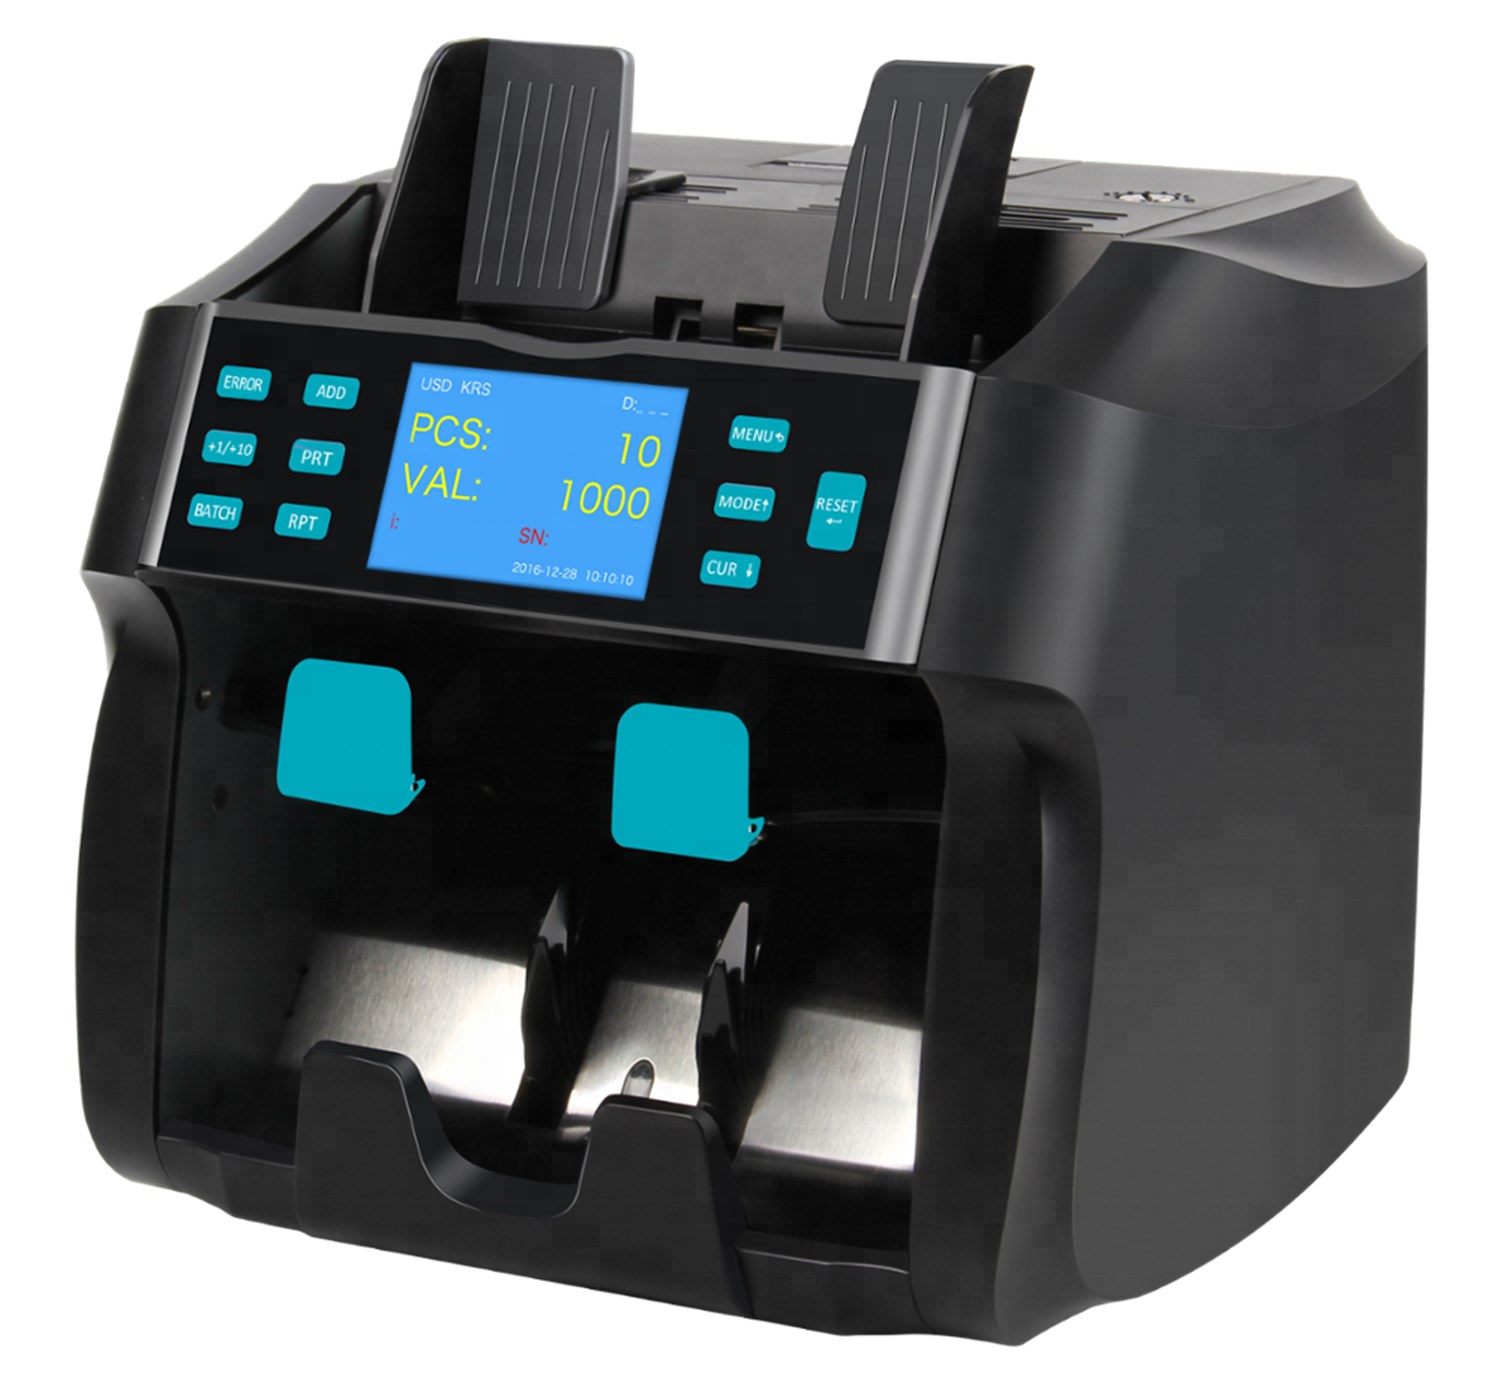 1+1 pockets Multi-currency Discriminator mixed banknote sorter value counter machine ST-4000